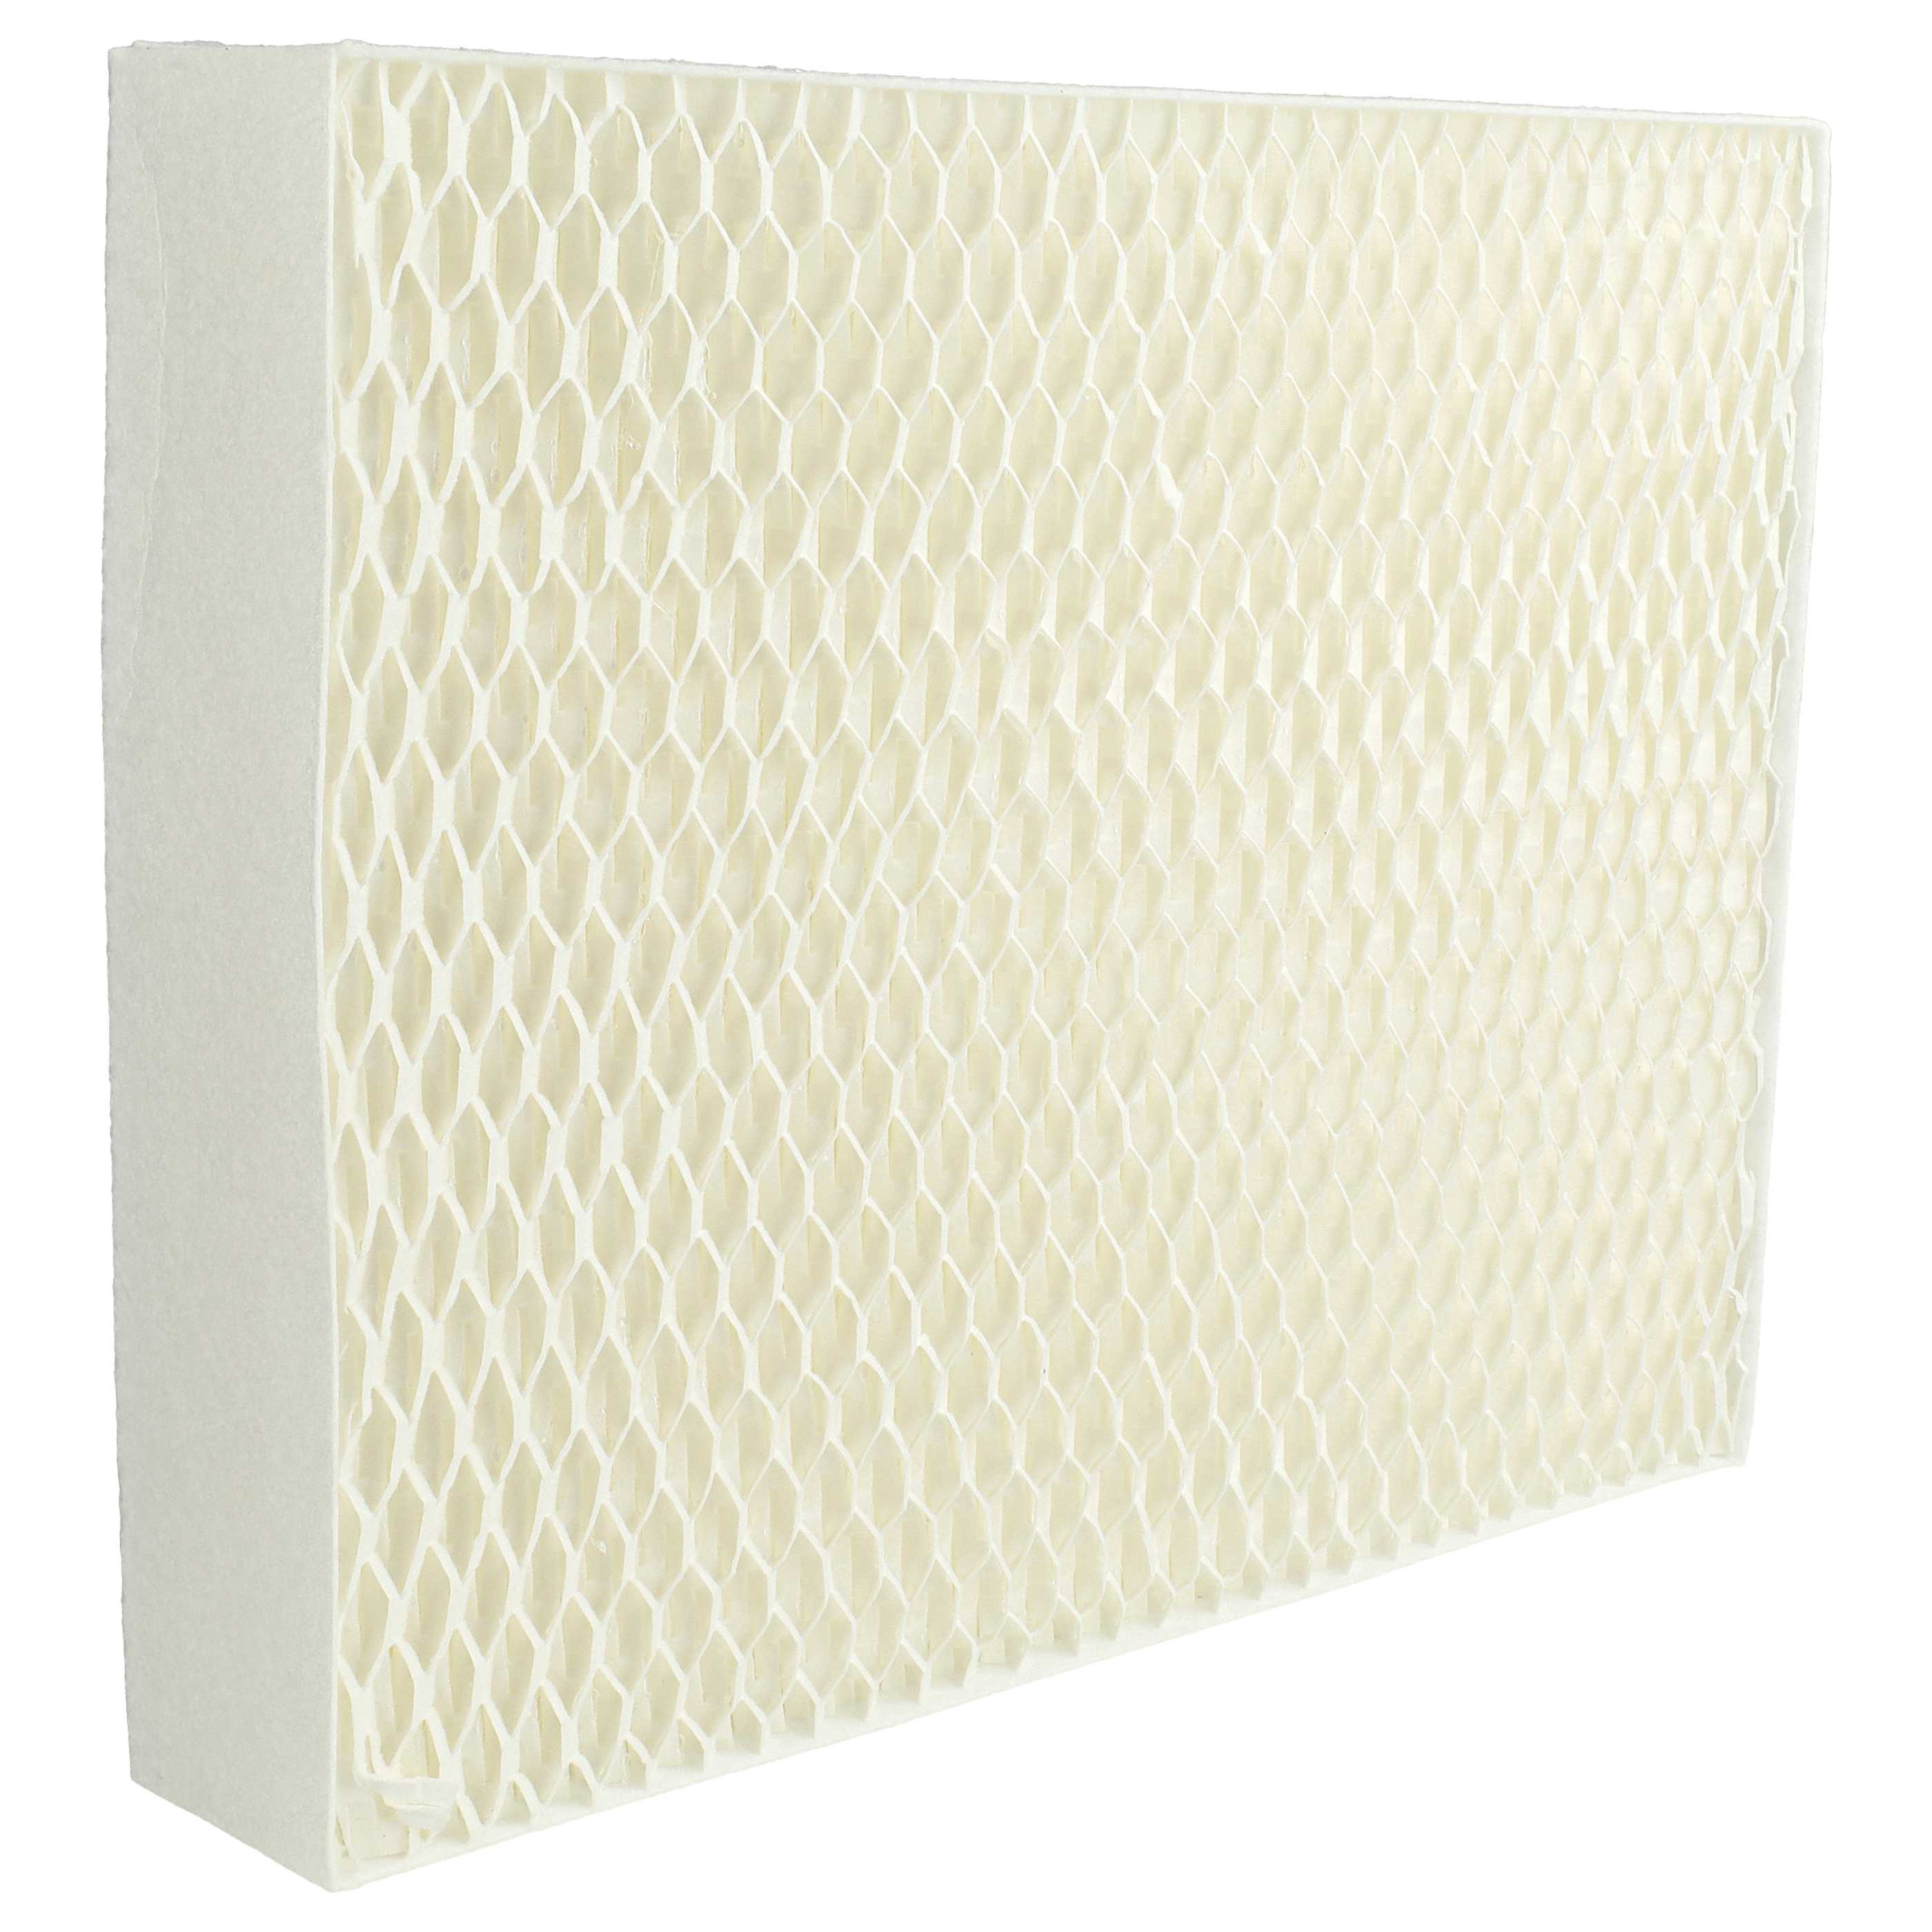 6x Filter replaces Stadler Form 10004, 14643/10 for Humidifier - paper